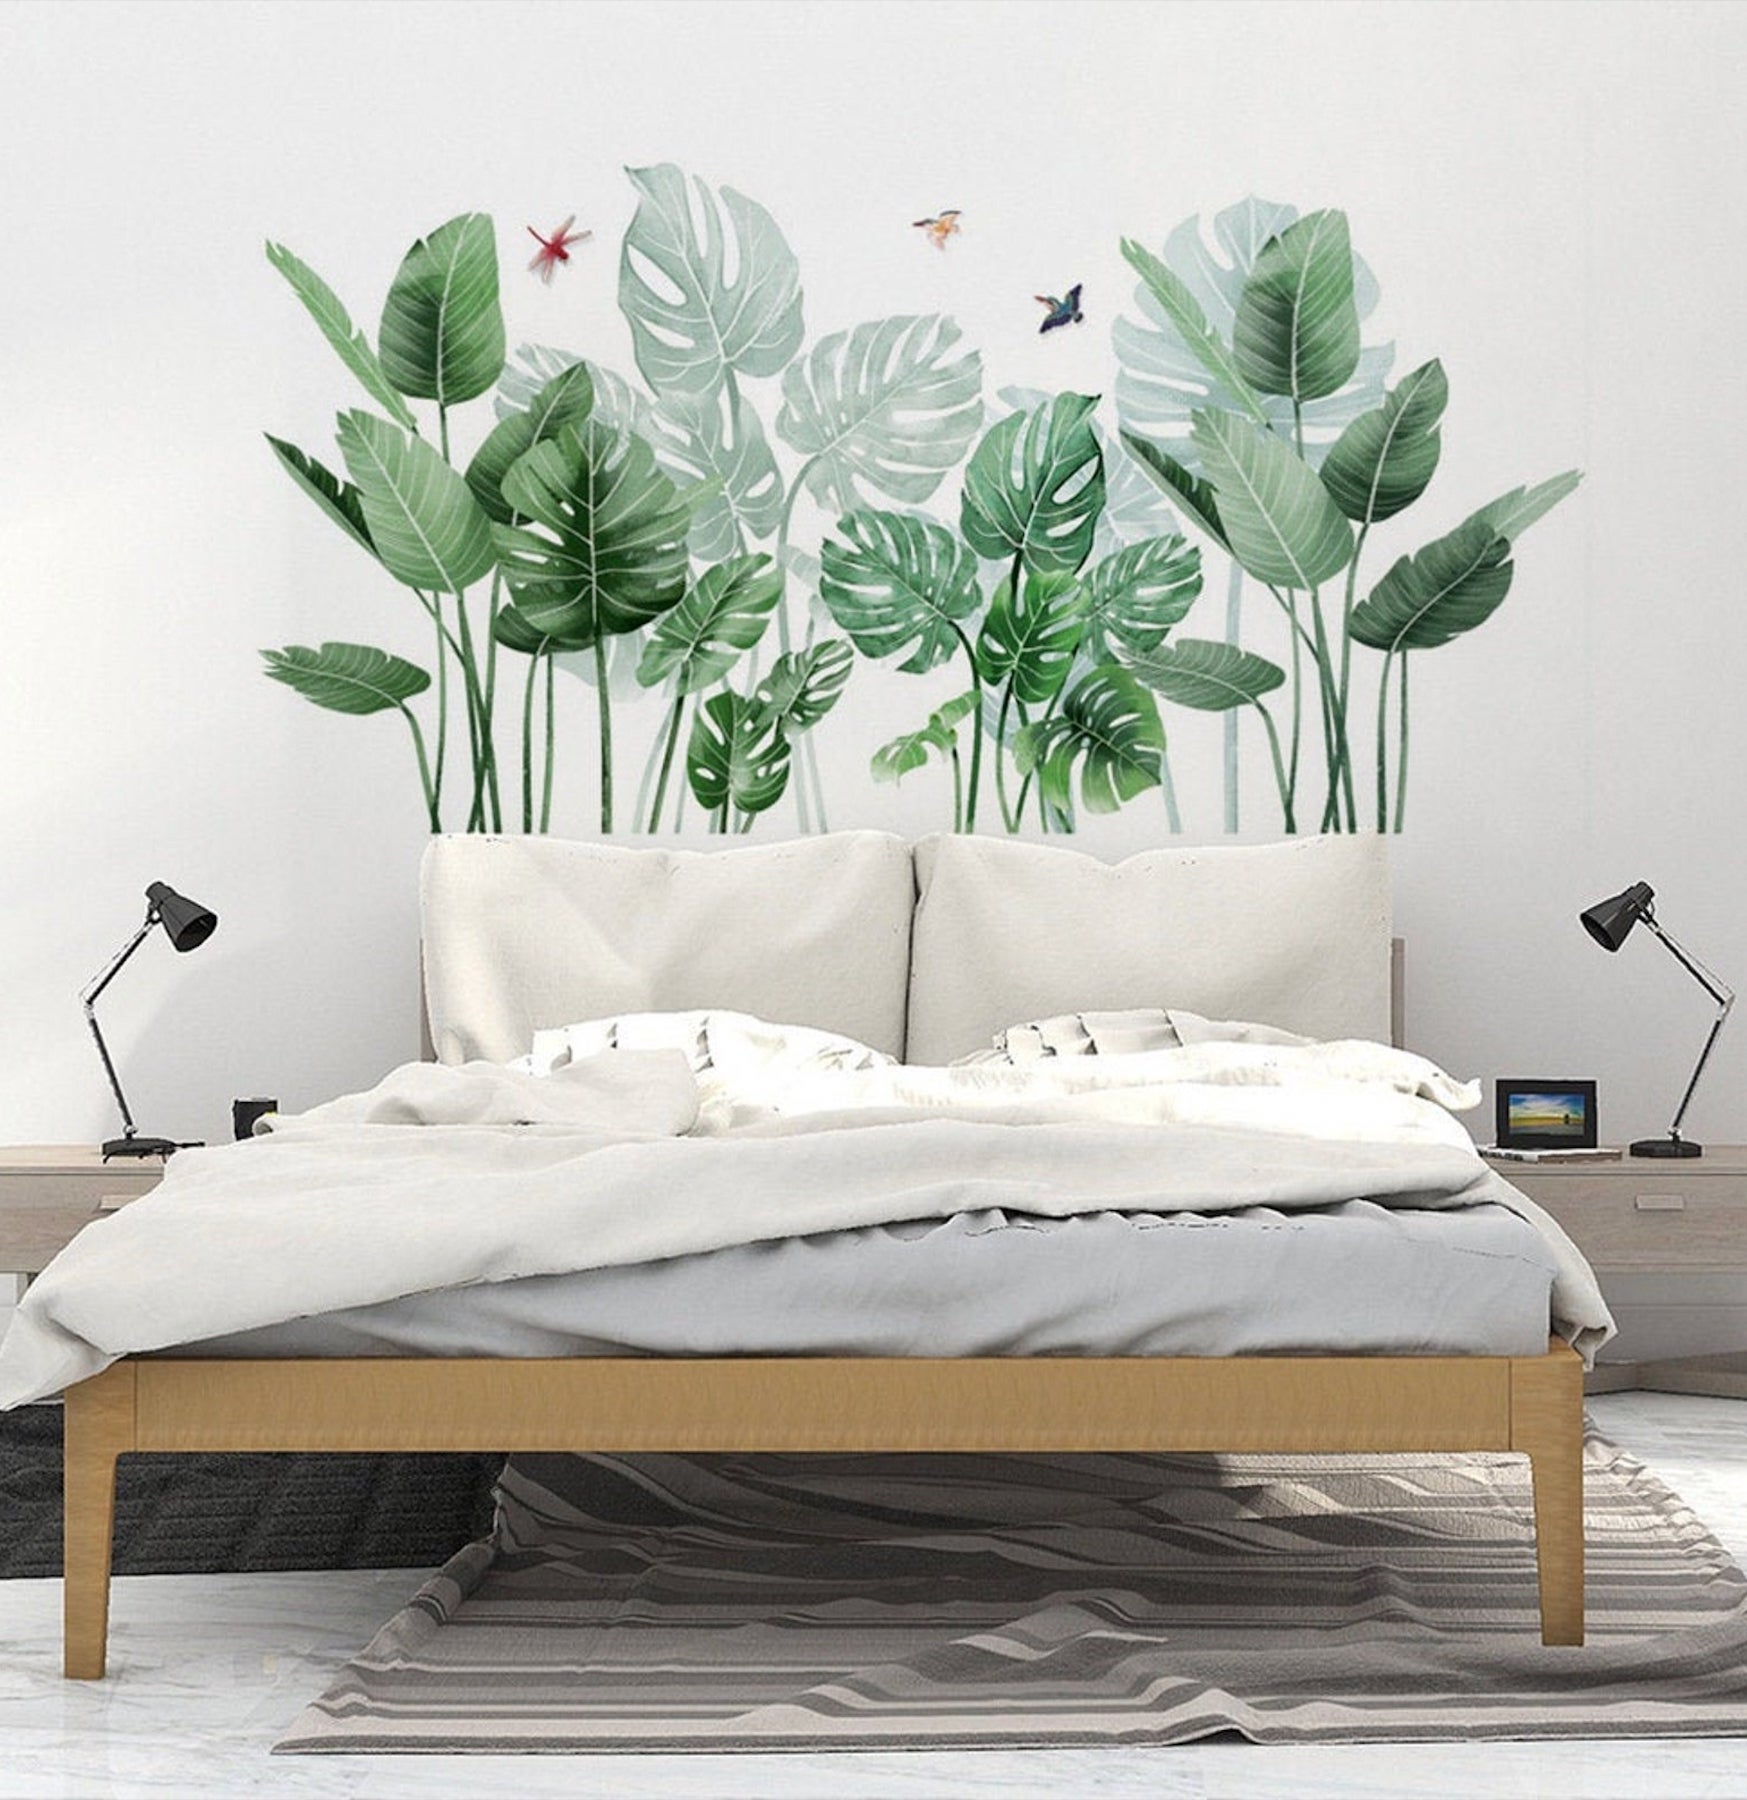 A tall decal of a monstera leaf with butterflies serves as a headboard for a wooden, skinny-legged bed with white and gray bedding. End tables the color of driftwood with desk lamps flank the bed.